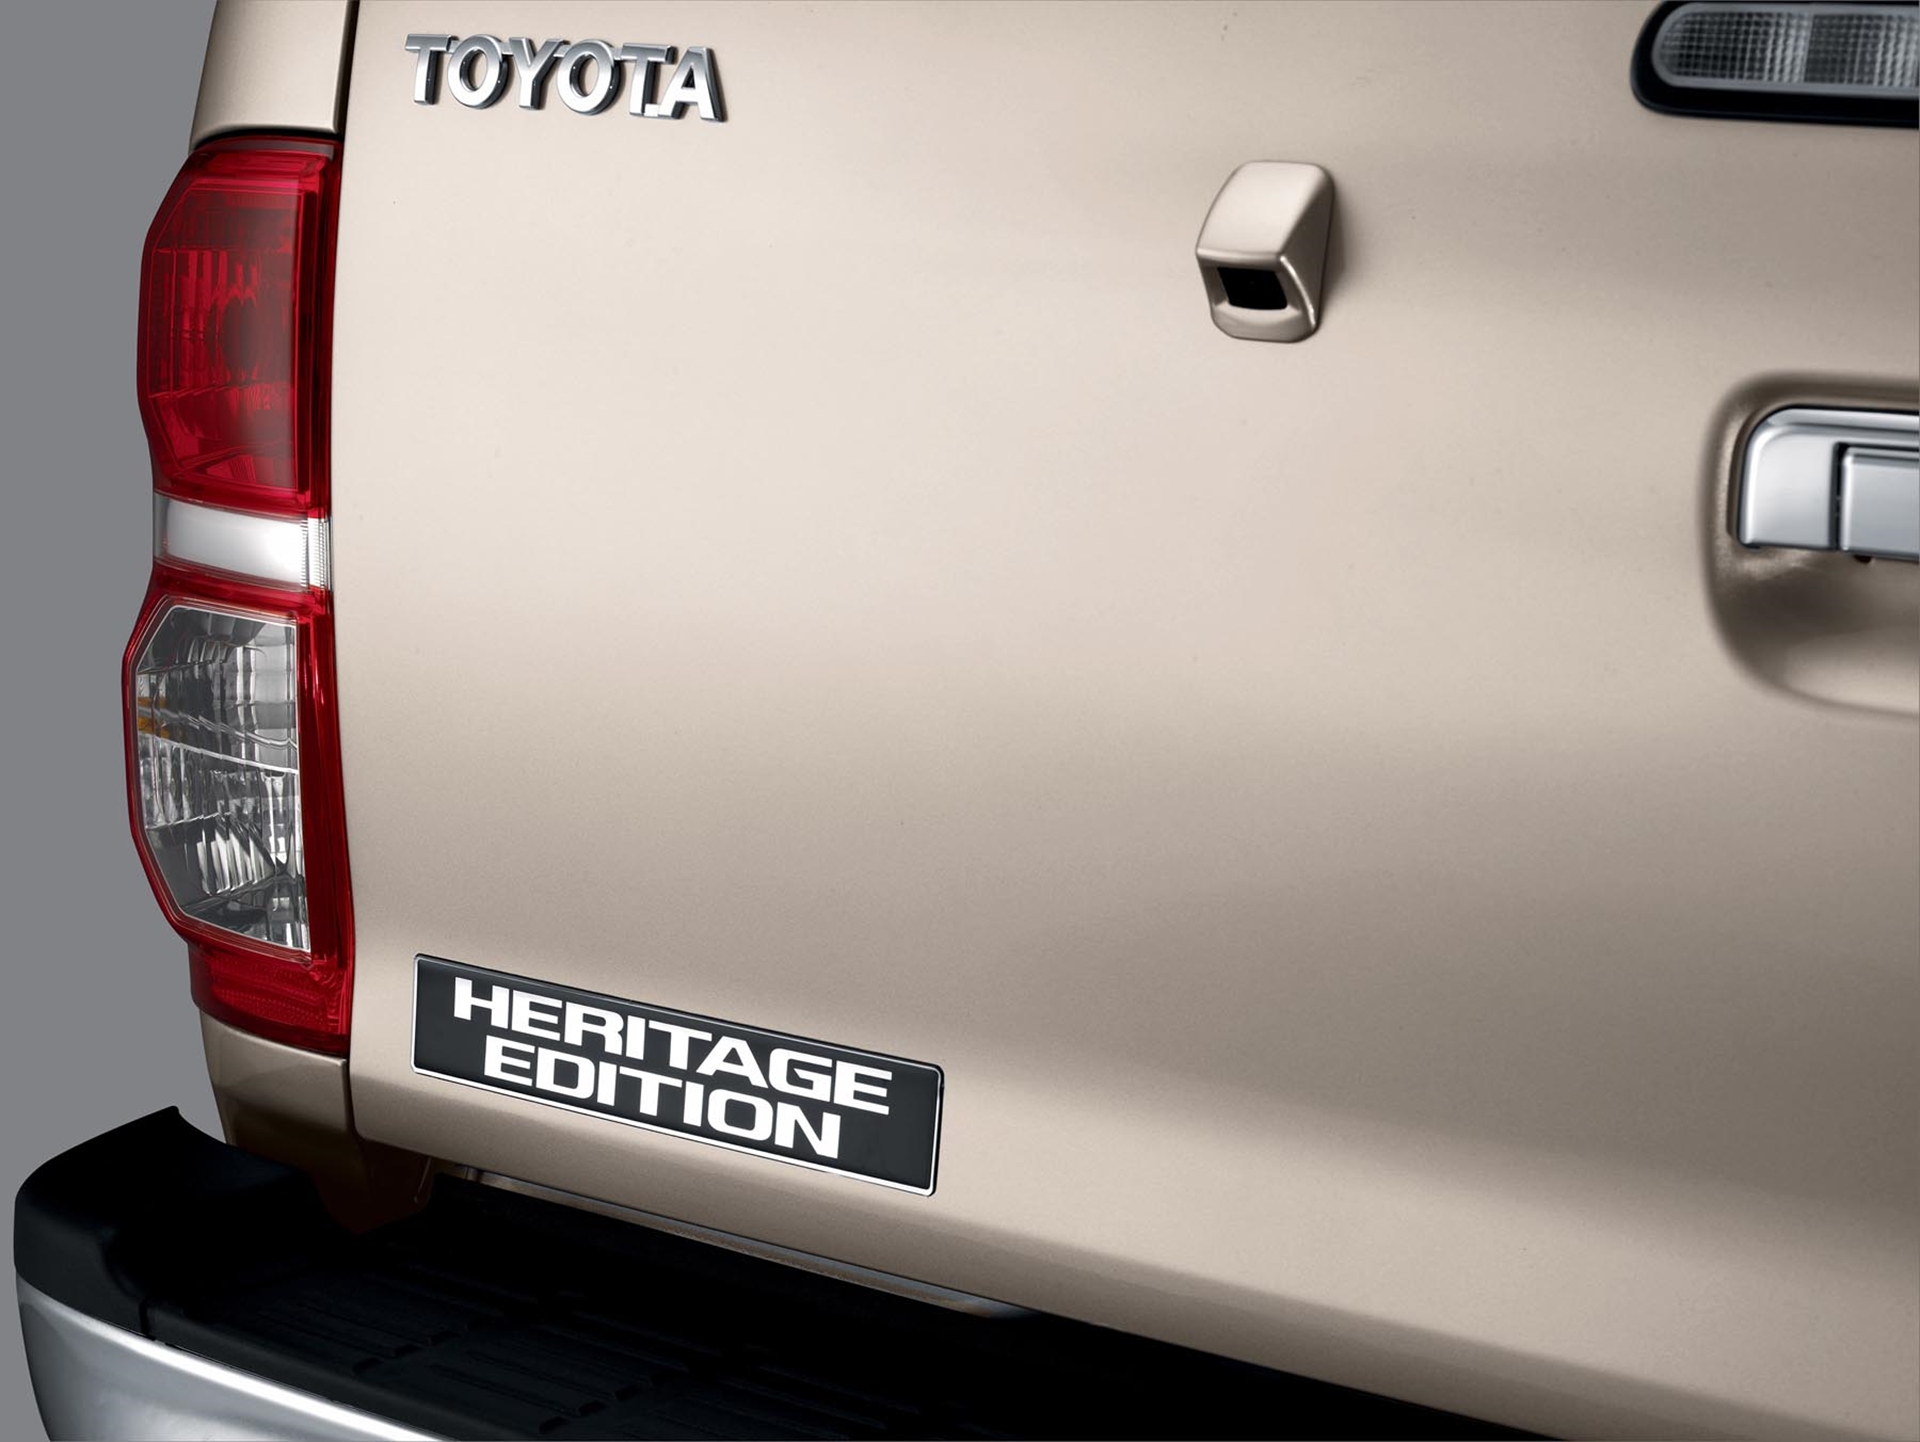 Toyota Hilux, Corolla and Fortuner Heritage Editions